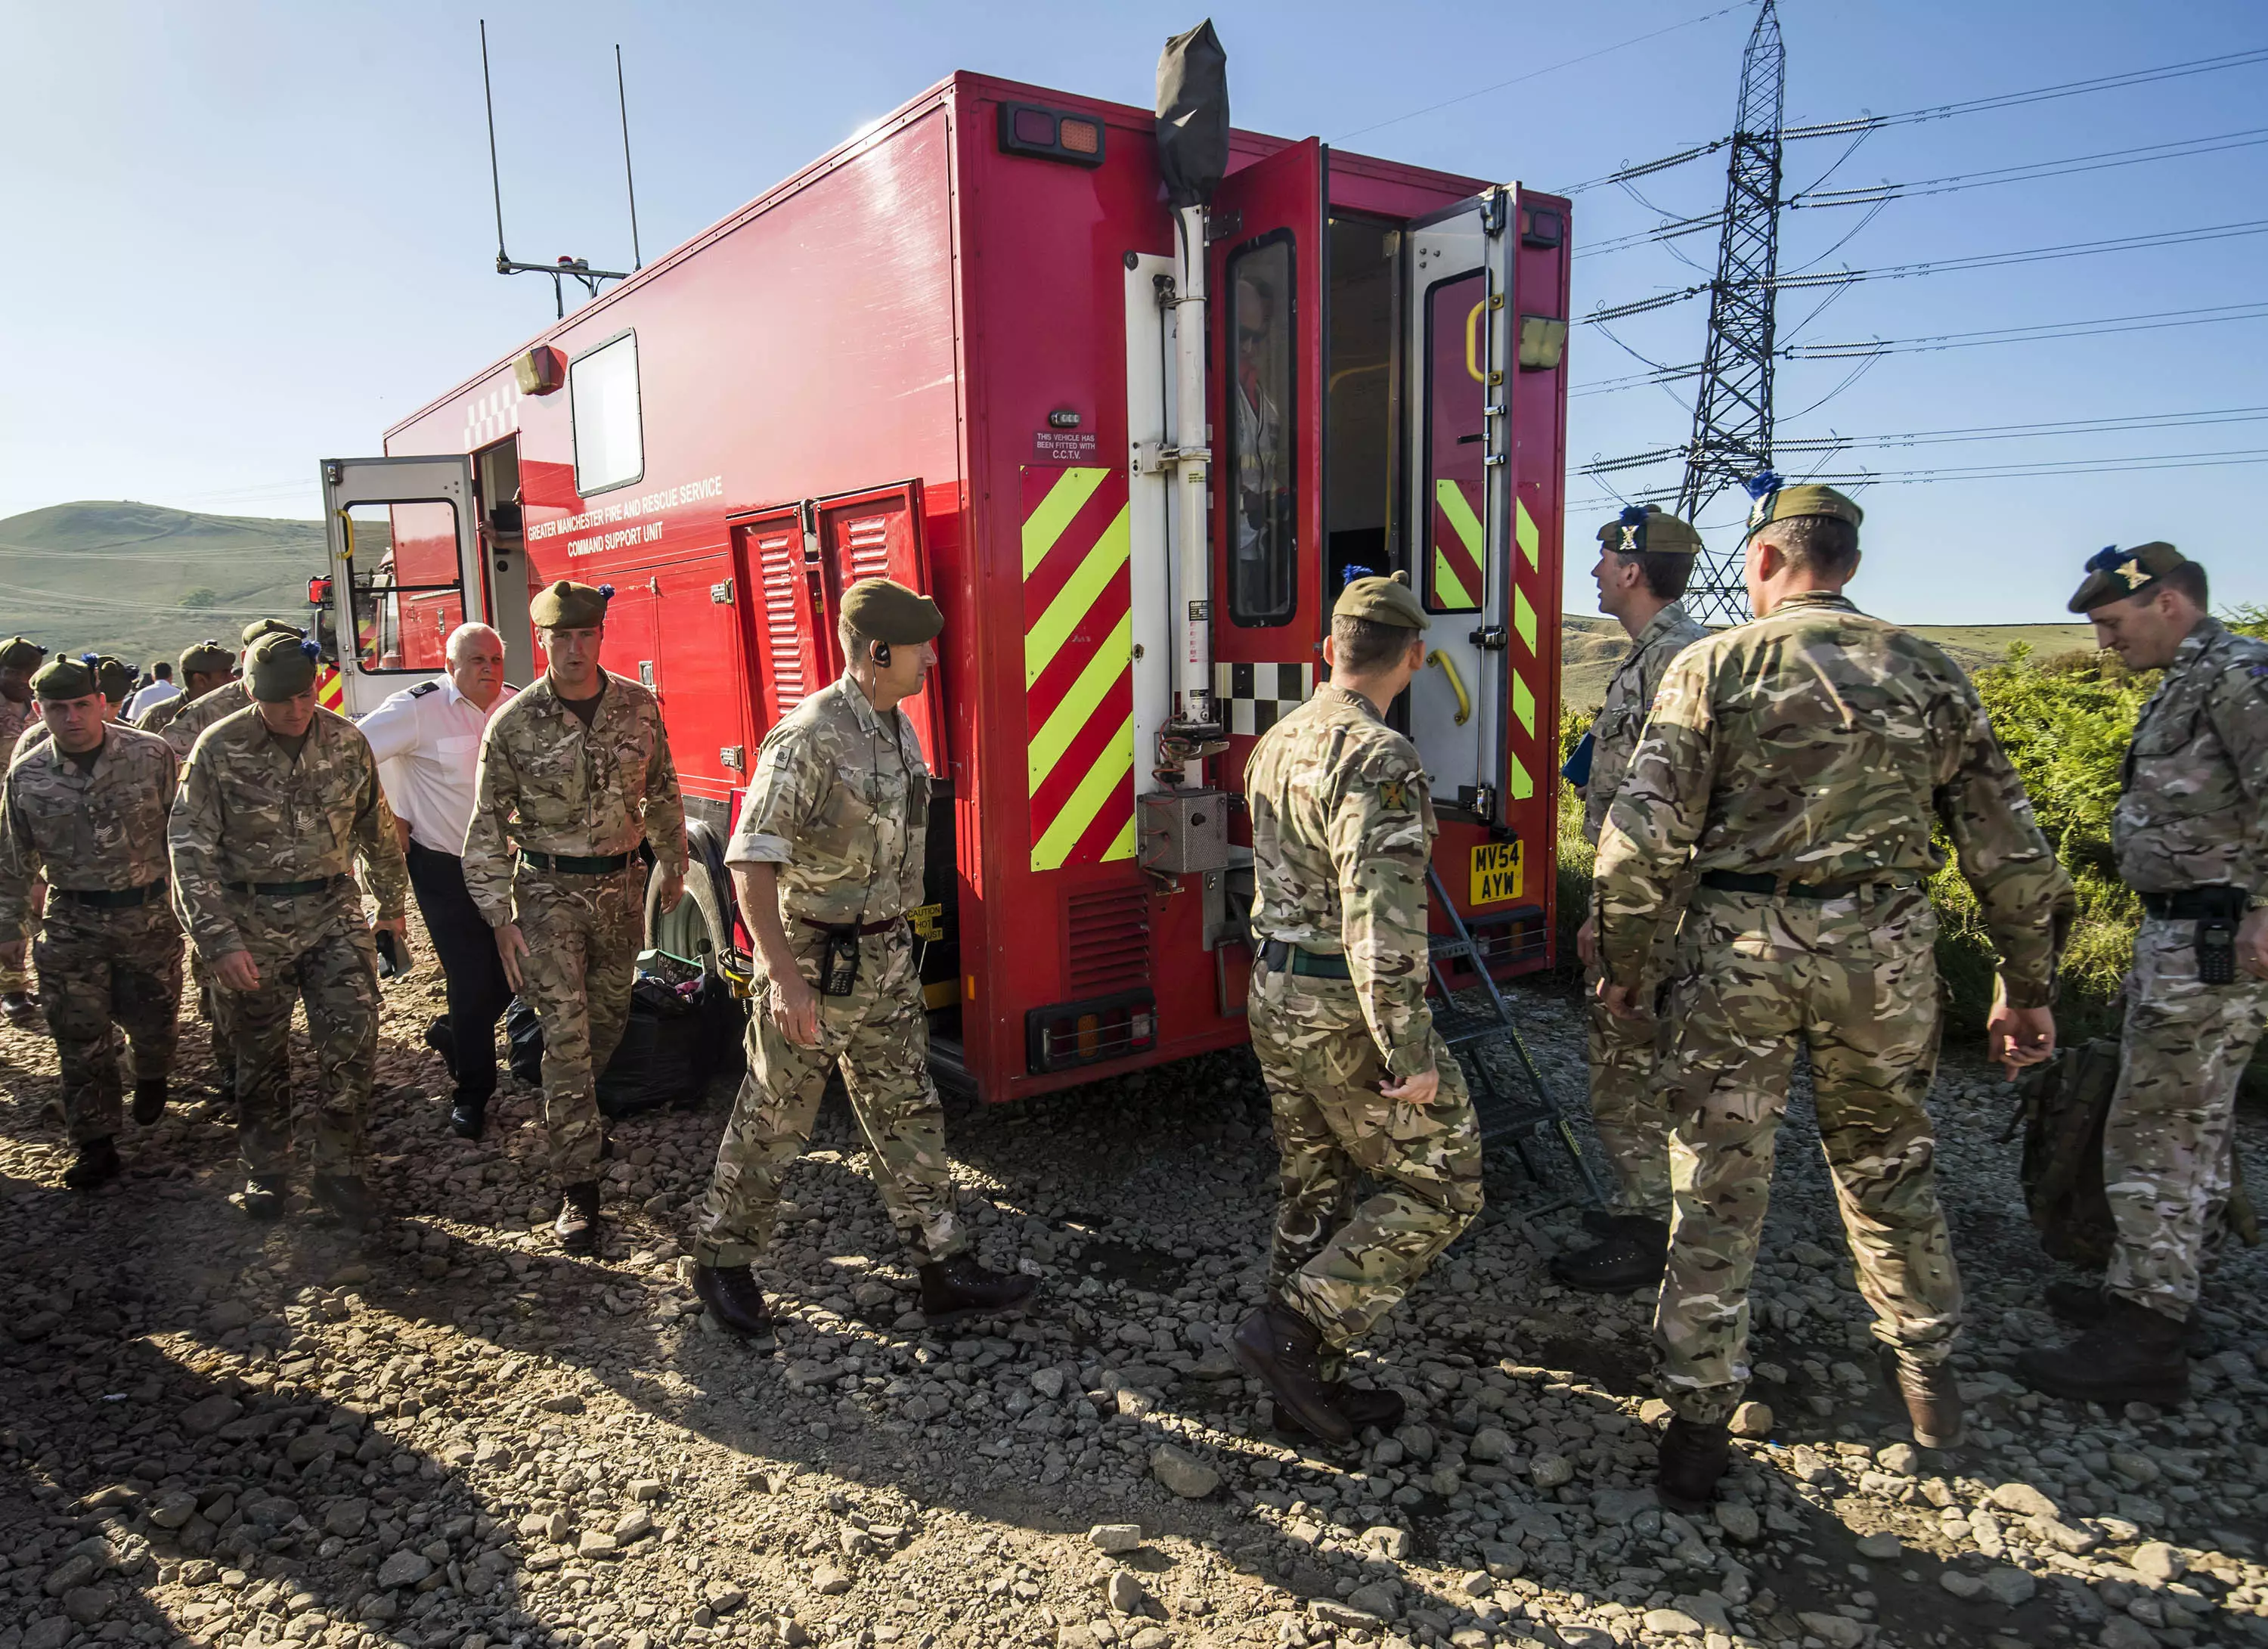 The army was deployed to Saddleworth last year.